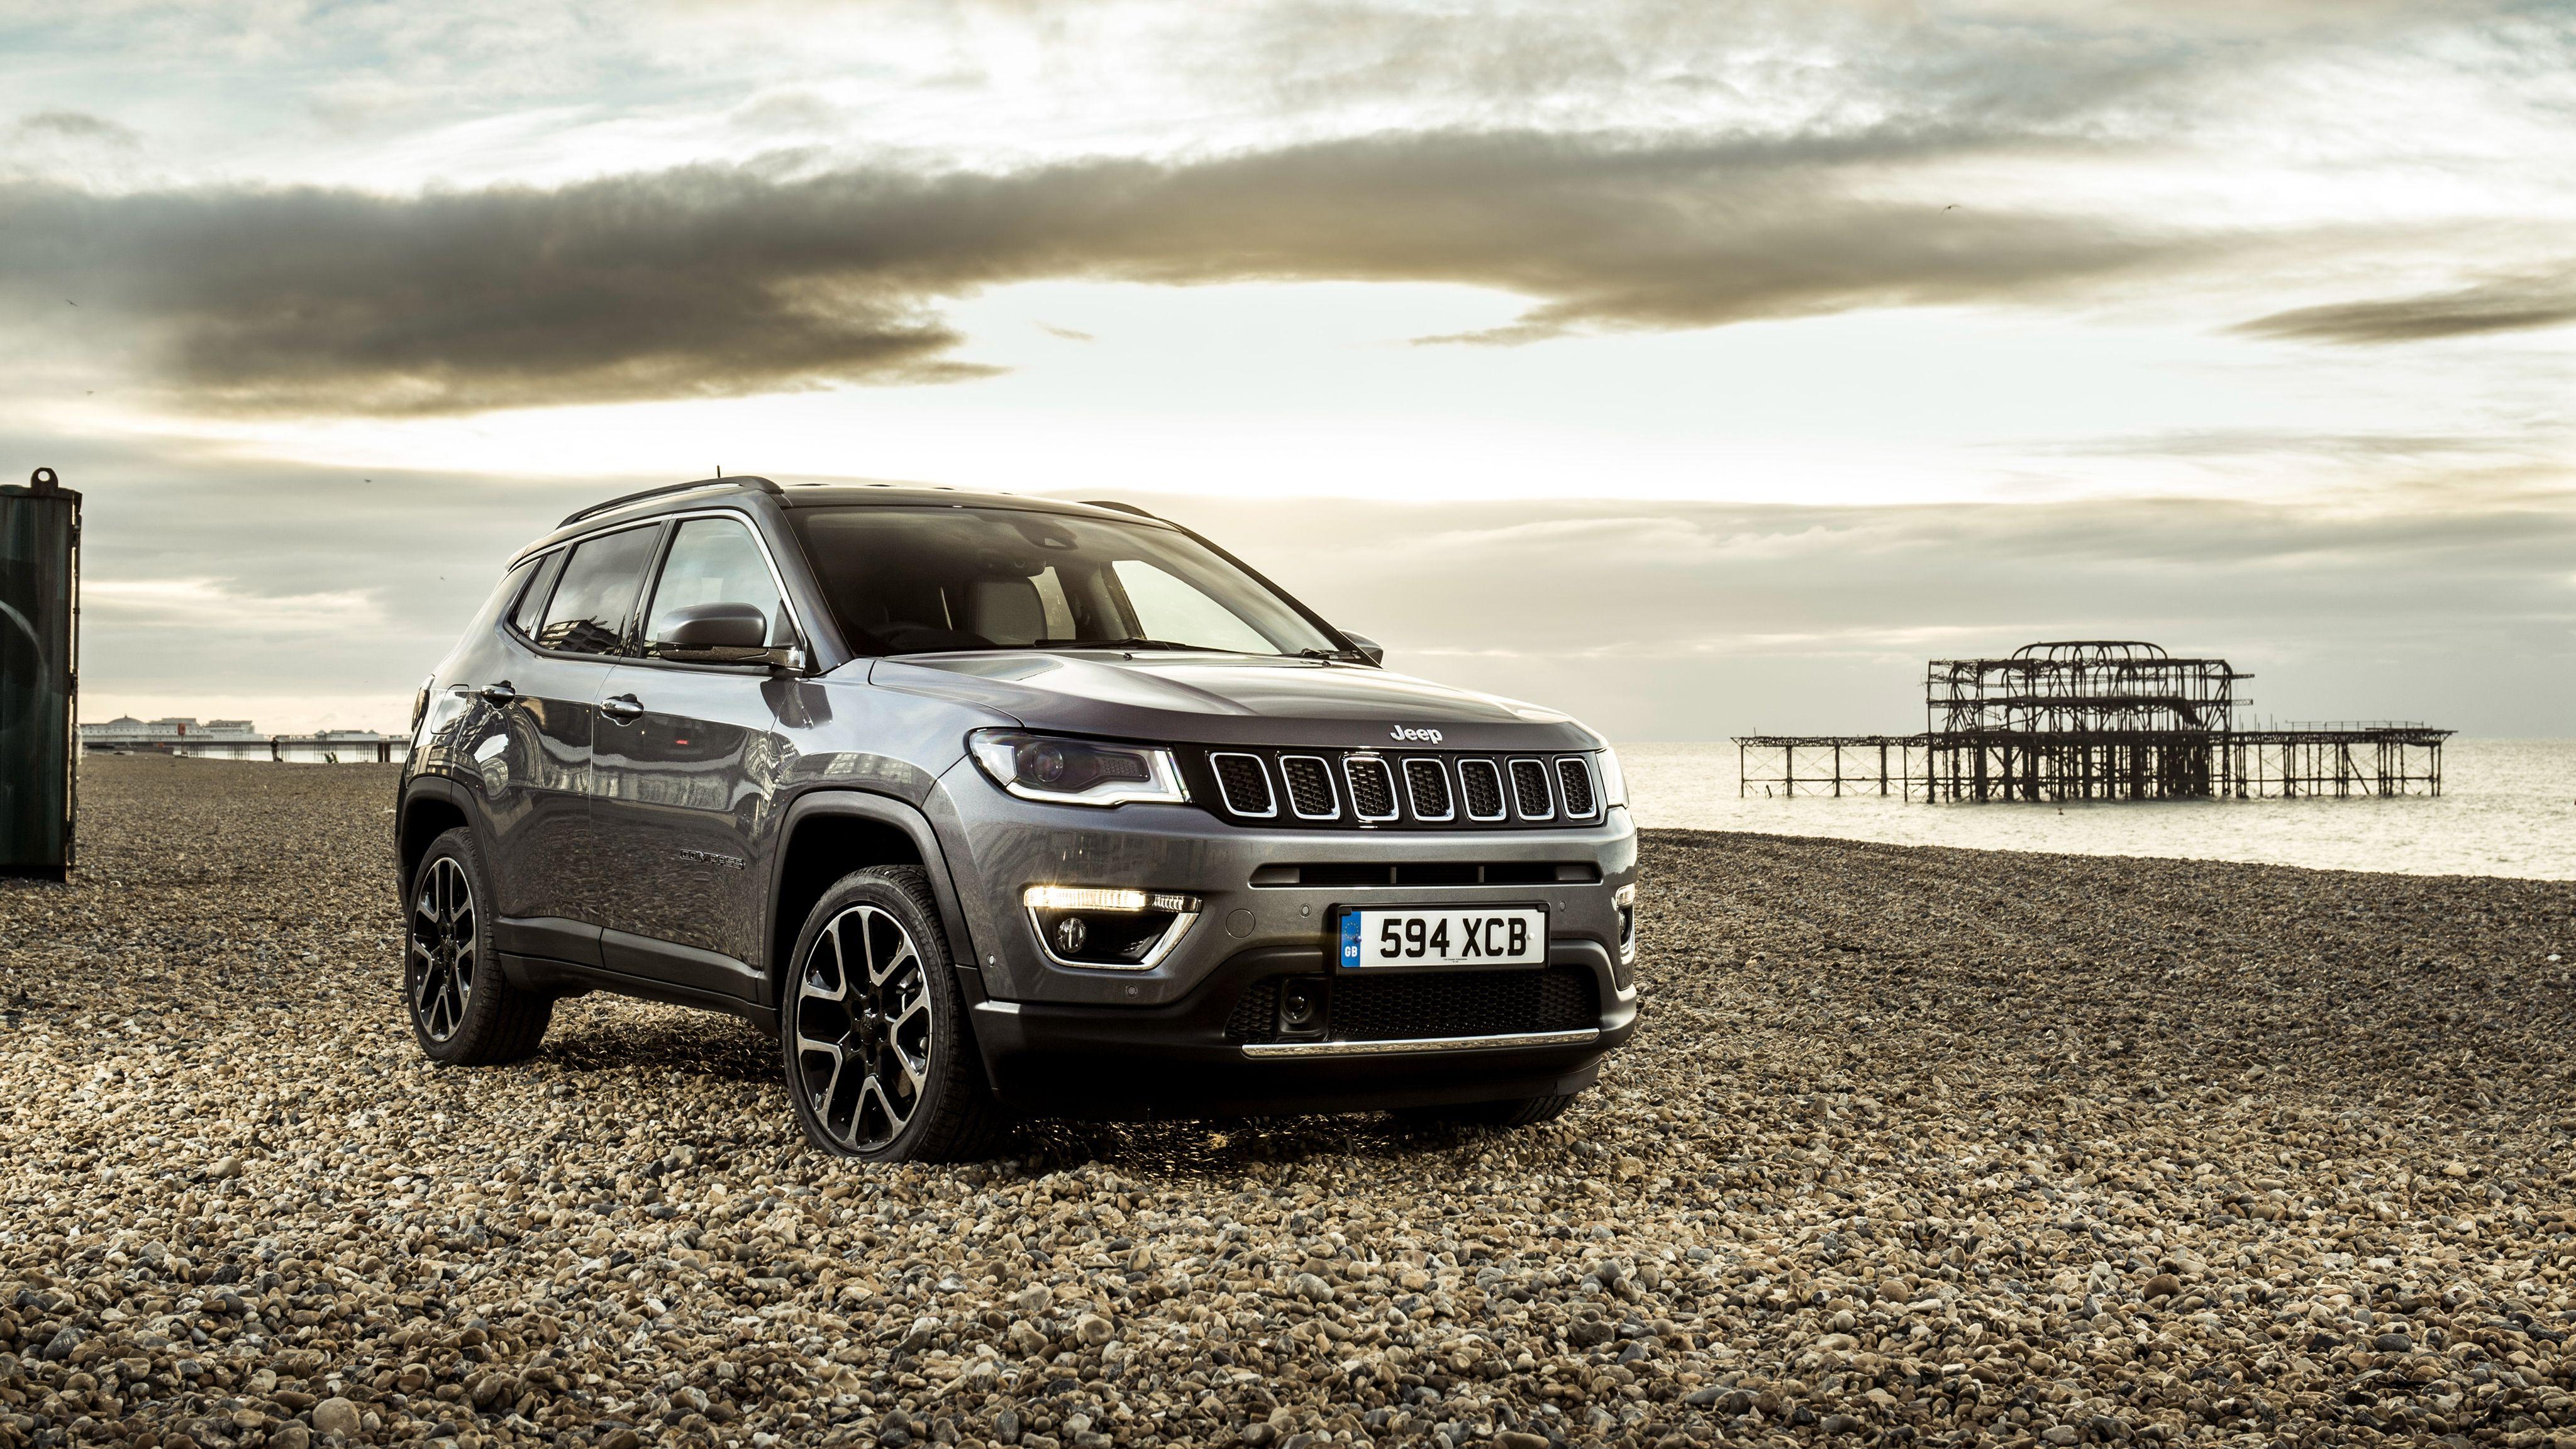 Which Years Of Used Jeep Compass Vehicles Are Most Reliable? - CoPilot